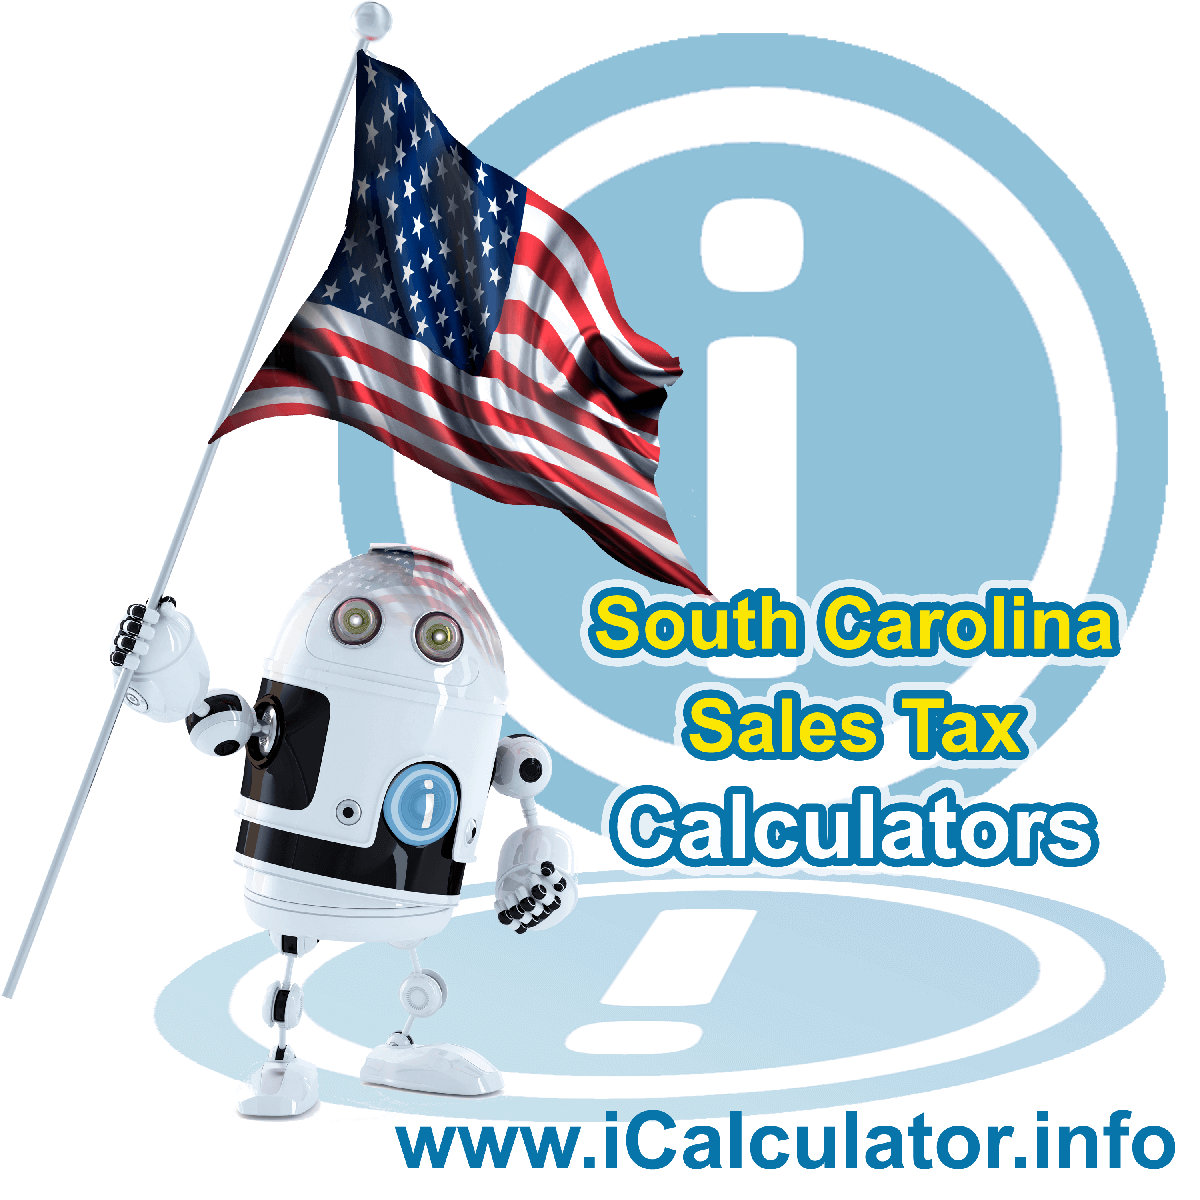 Greenwood Sales Rates: This image illustrates a calculator robot calculating Greenwood sales tax manually using the Greenwood Sales Tax Formula. You can use this information to calculate Greenwood Sales Tax manually or use the Greenwood Sales Tax Calculator to calculate sales tax online.